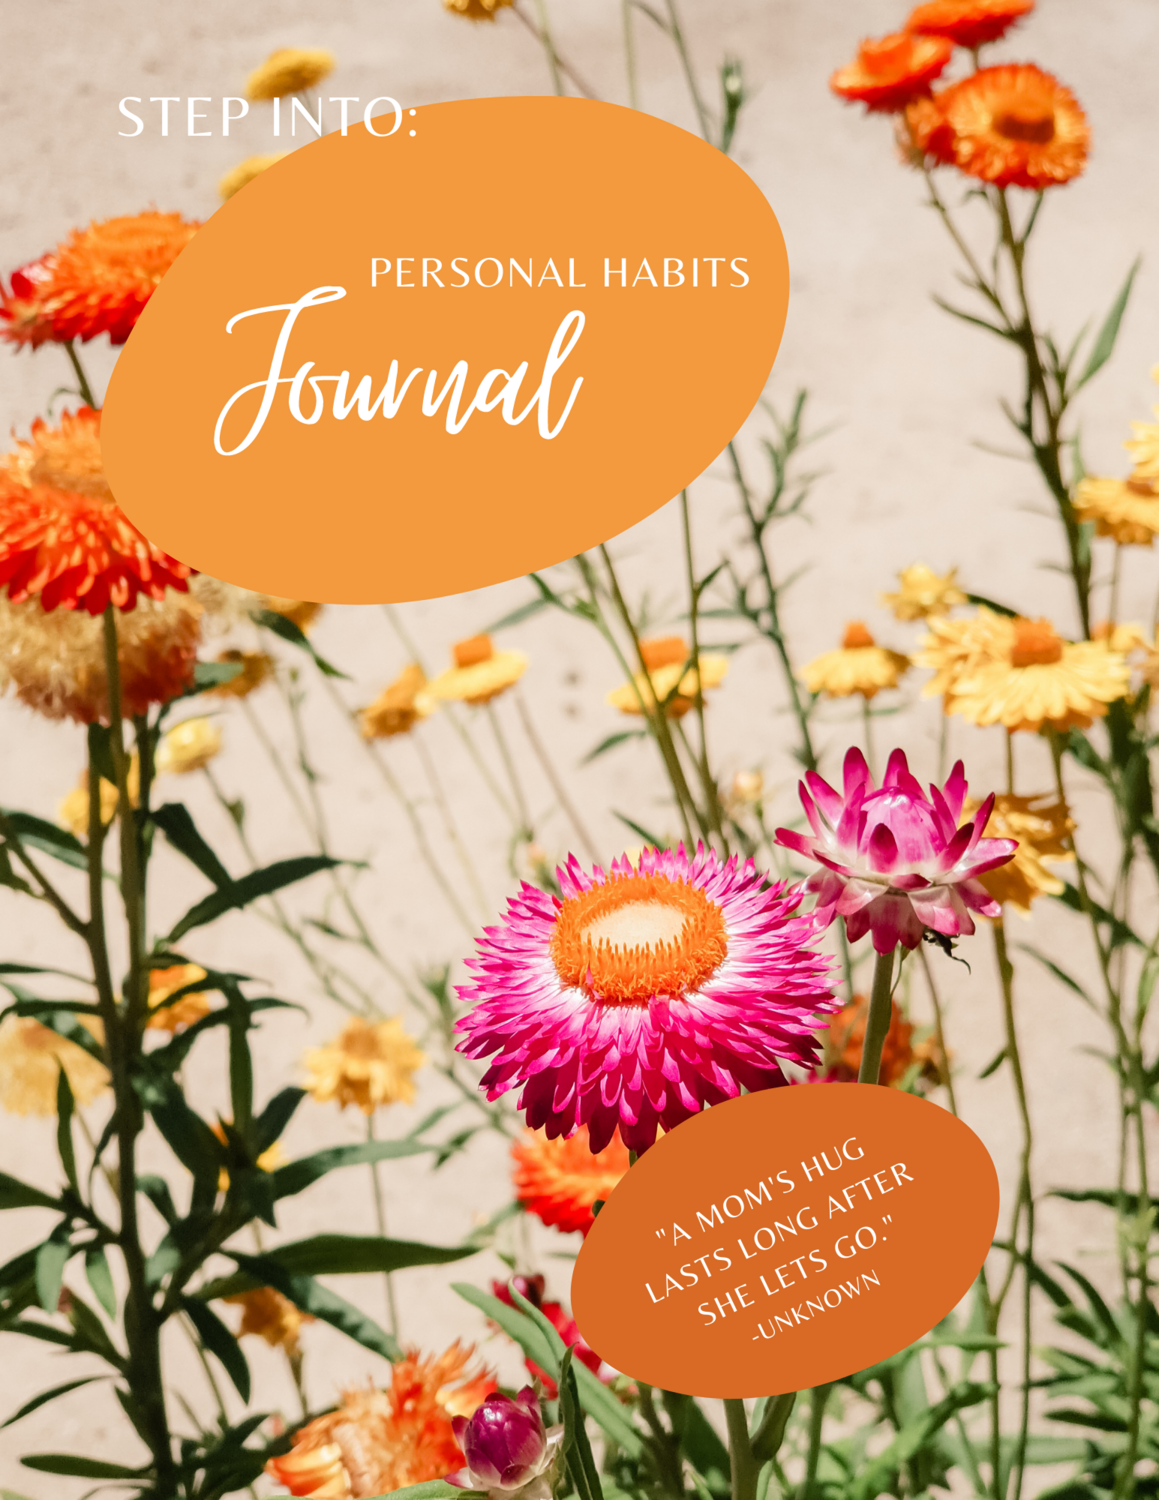 Step Into: Personal Habits Journal